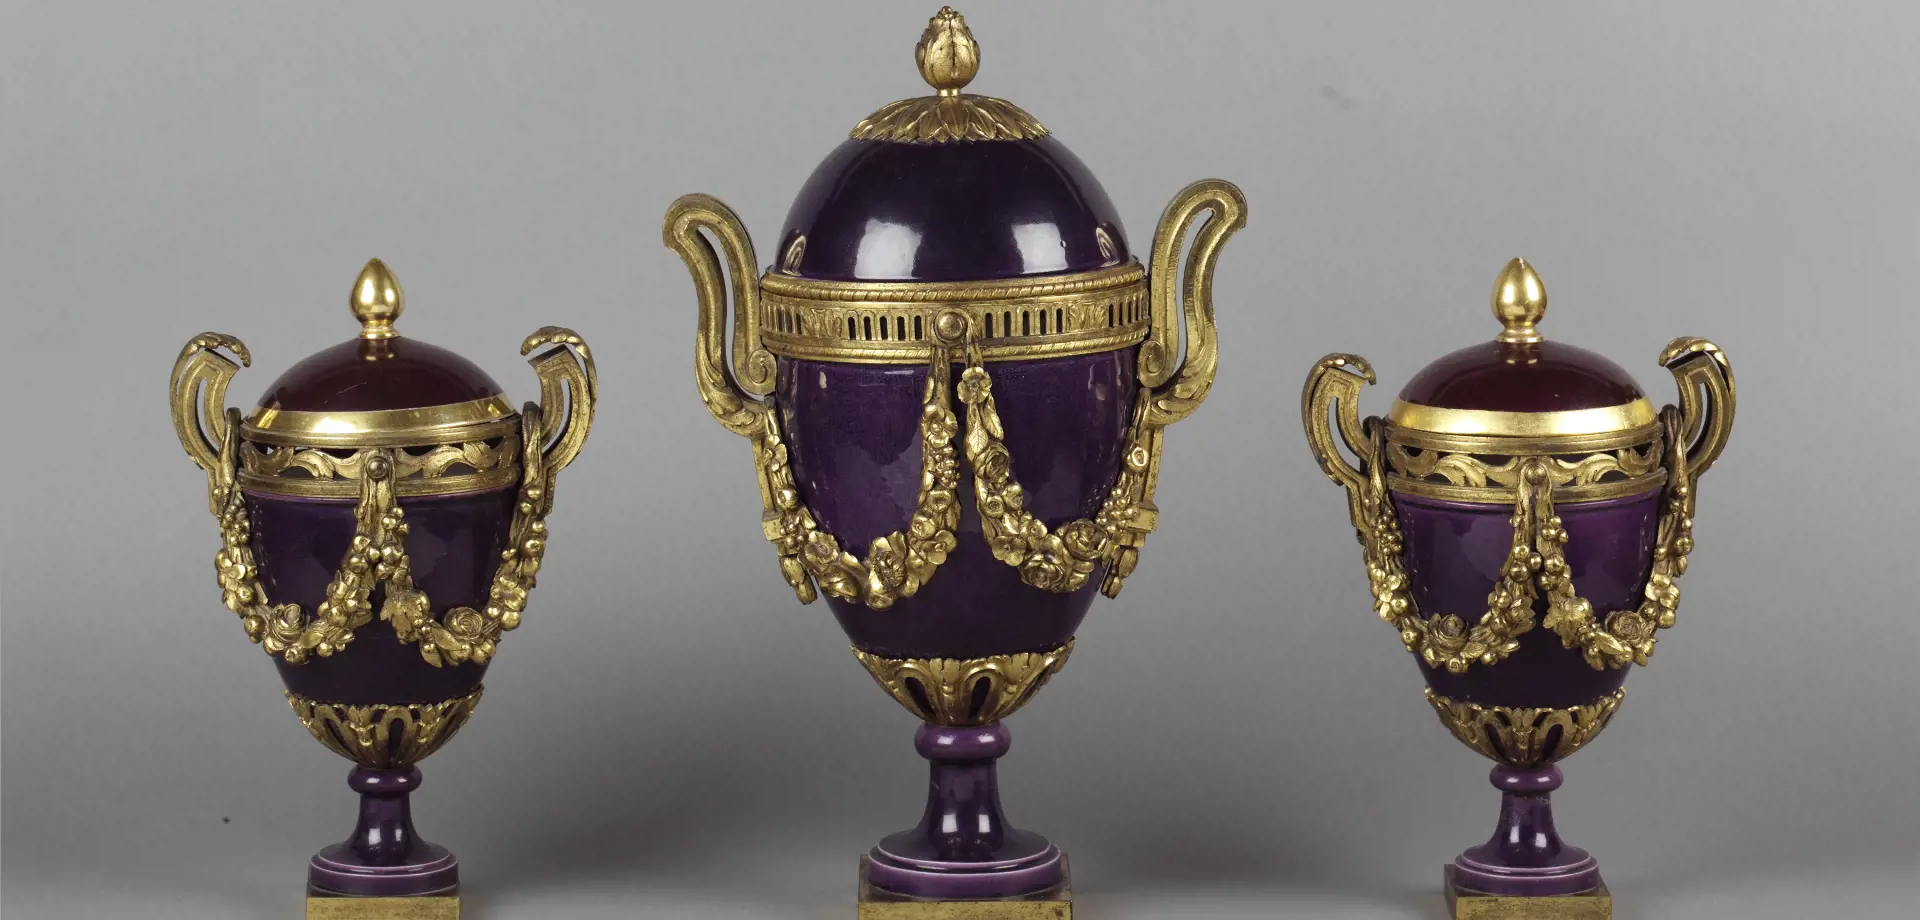 A Louis XVI gilt-bronze mounted Sèvres violet glaze porcelain garniture of three vases, two with covers